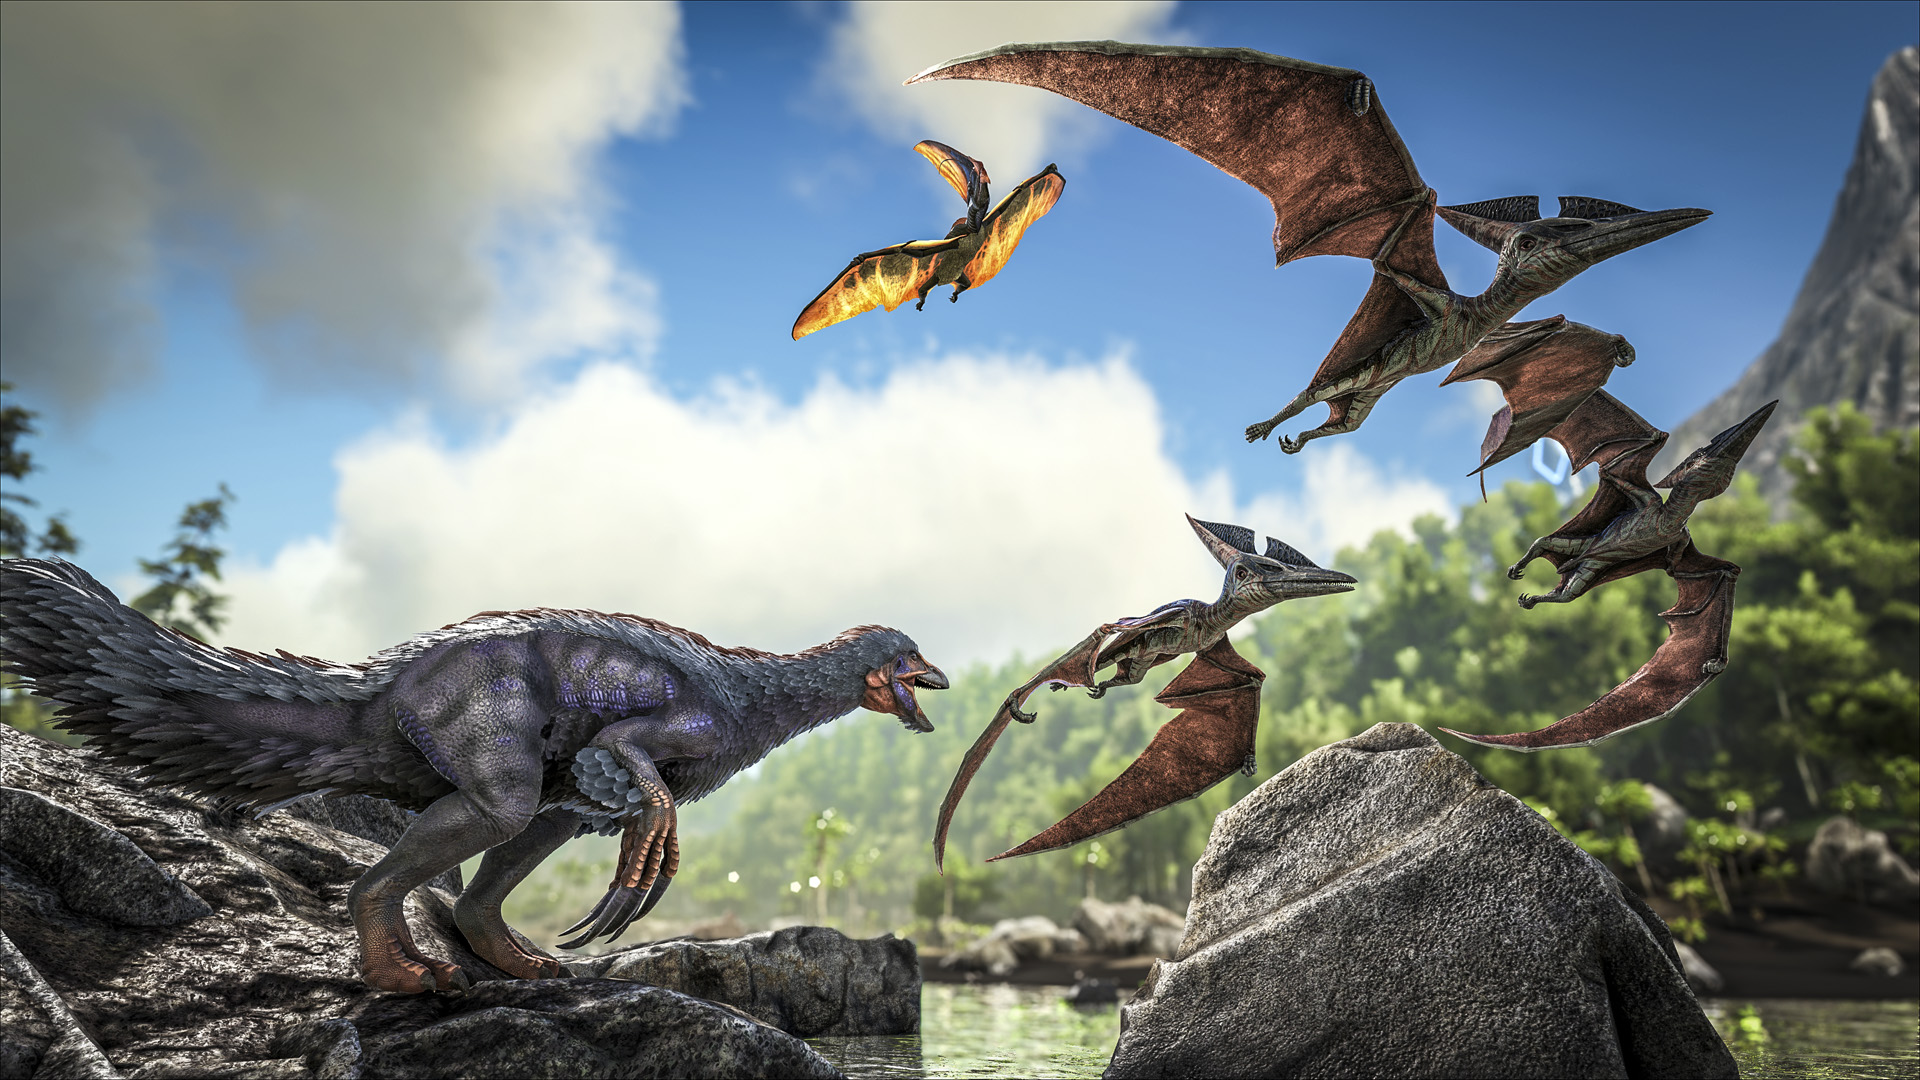 Ark remaster now even more expensive, doesn’t include Ark 2 any more: Dinosaurs roam a prehistoric landscape in Steam survival game Ark Survival Evolved